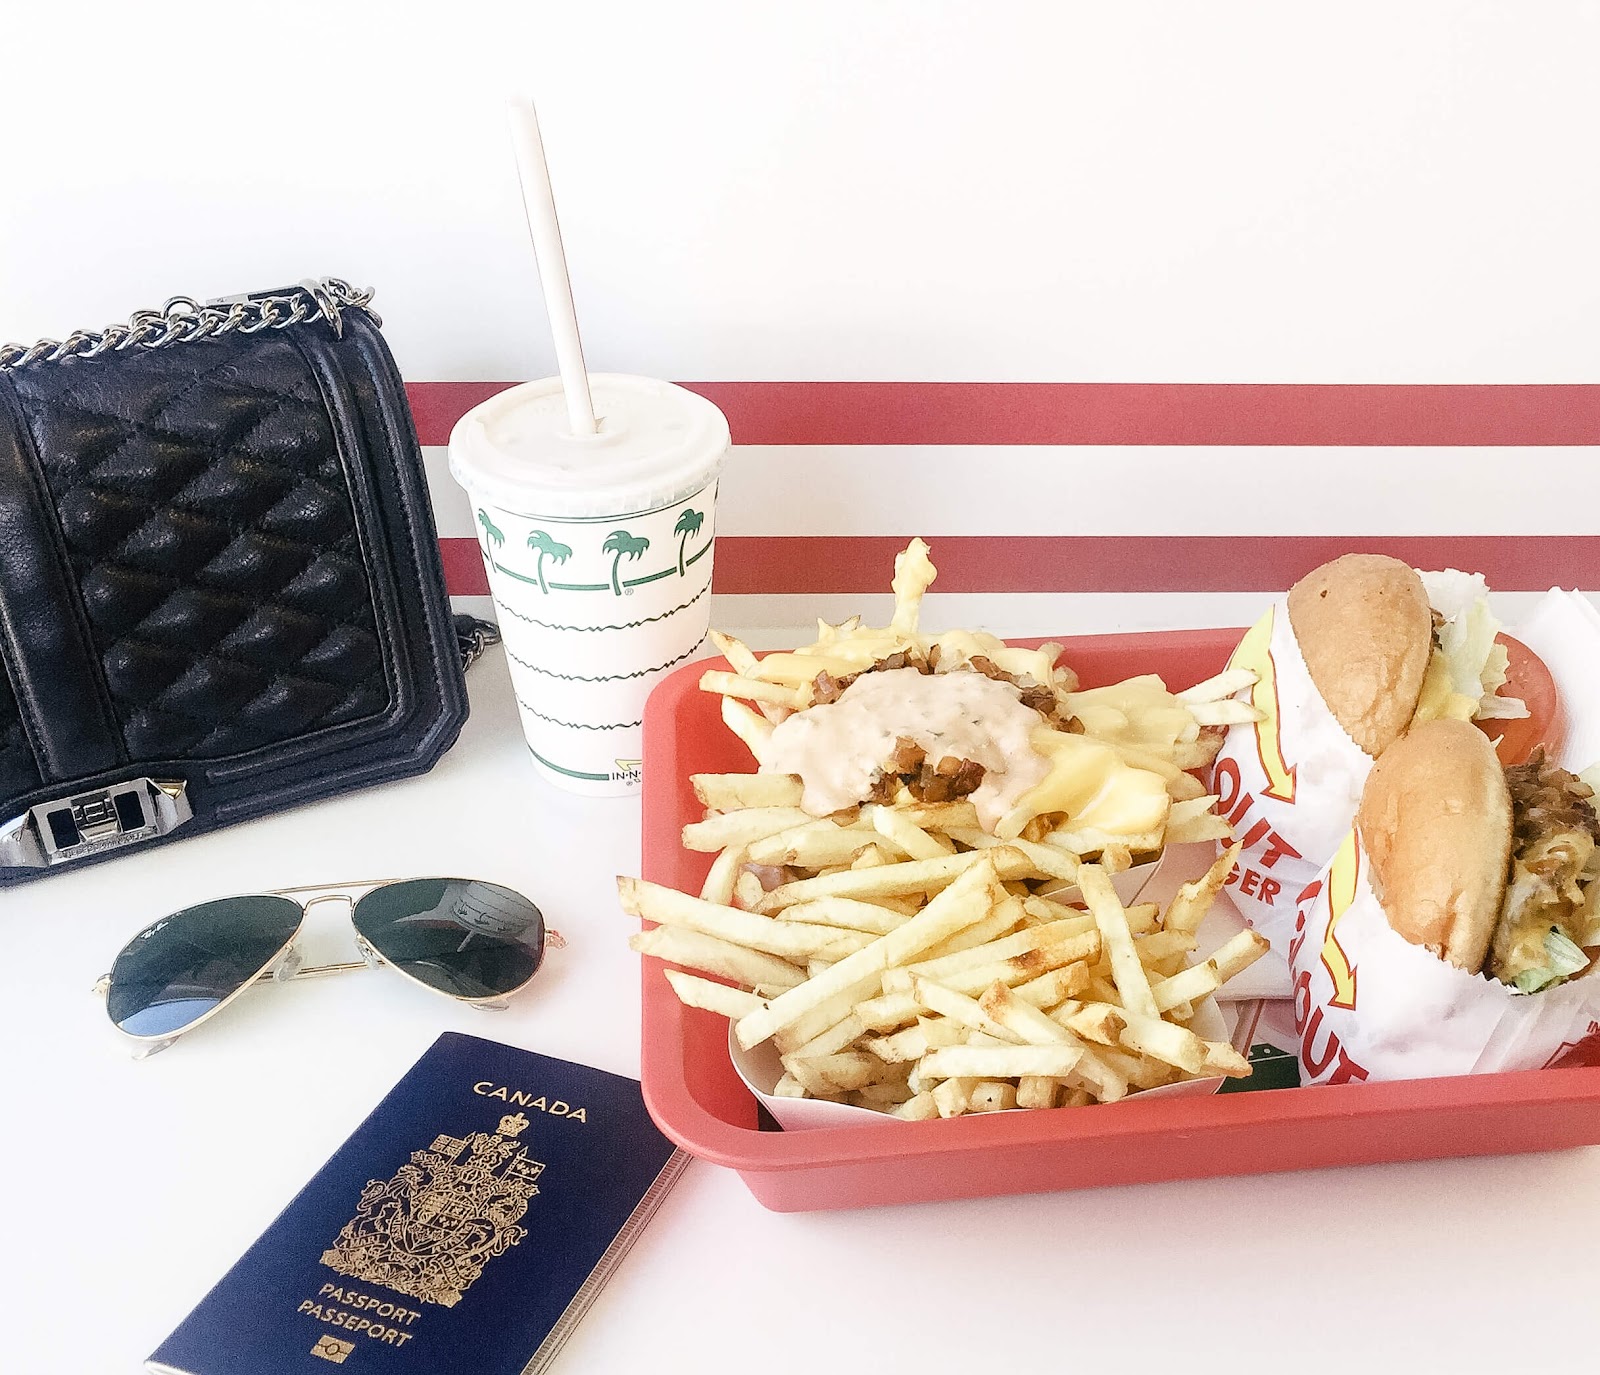 where to eat in Palm springs - In-n-out burger!